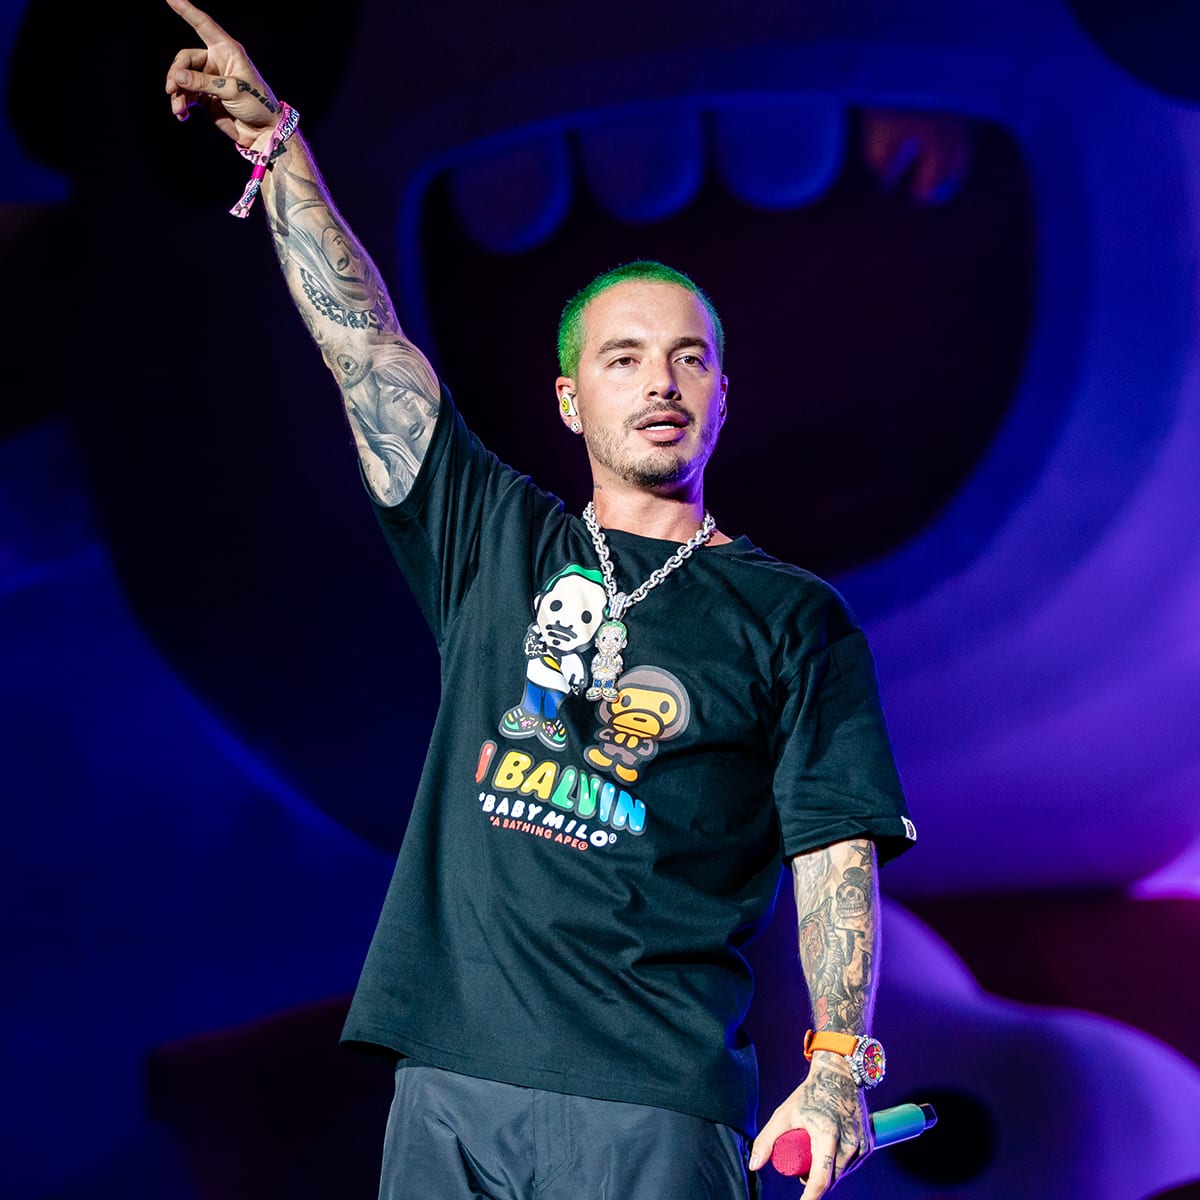 J. Balvin opens up about his depression: 'I was waiting to die'